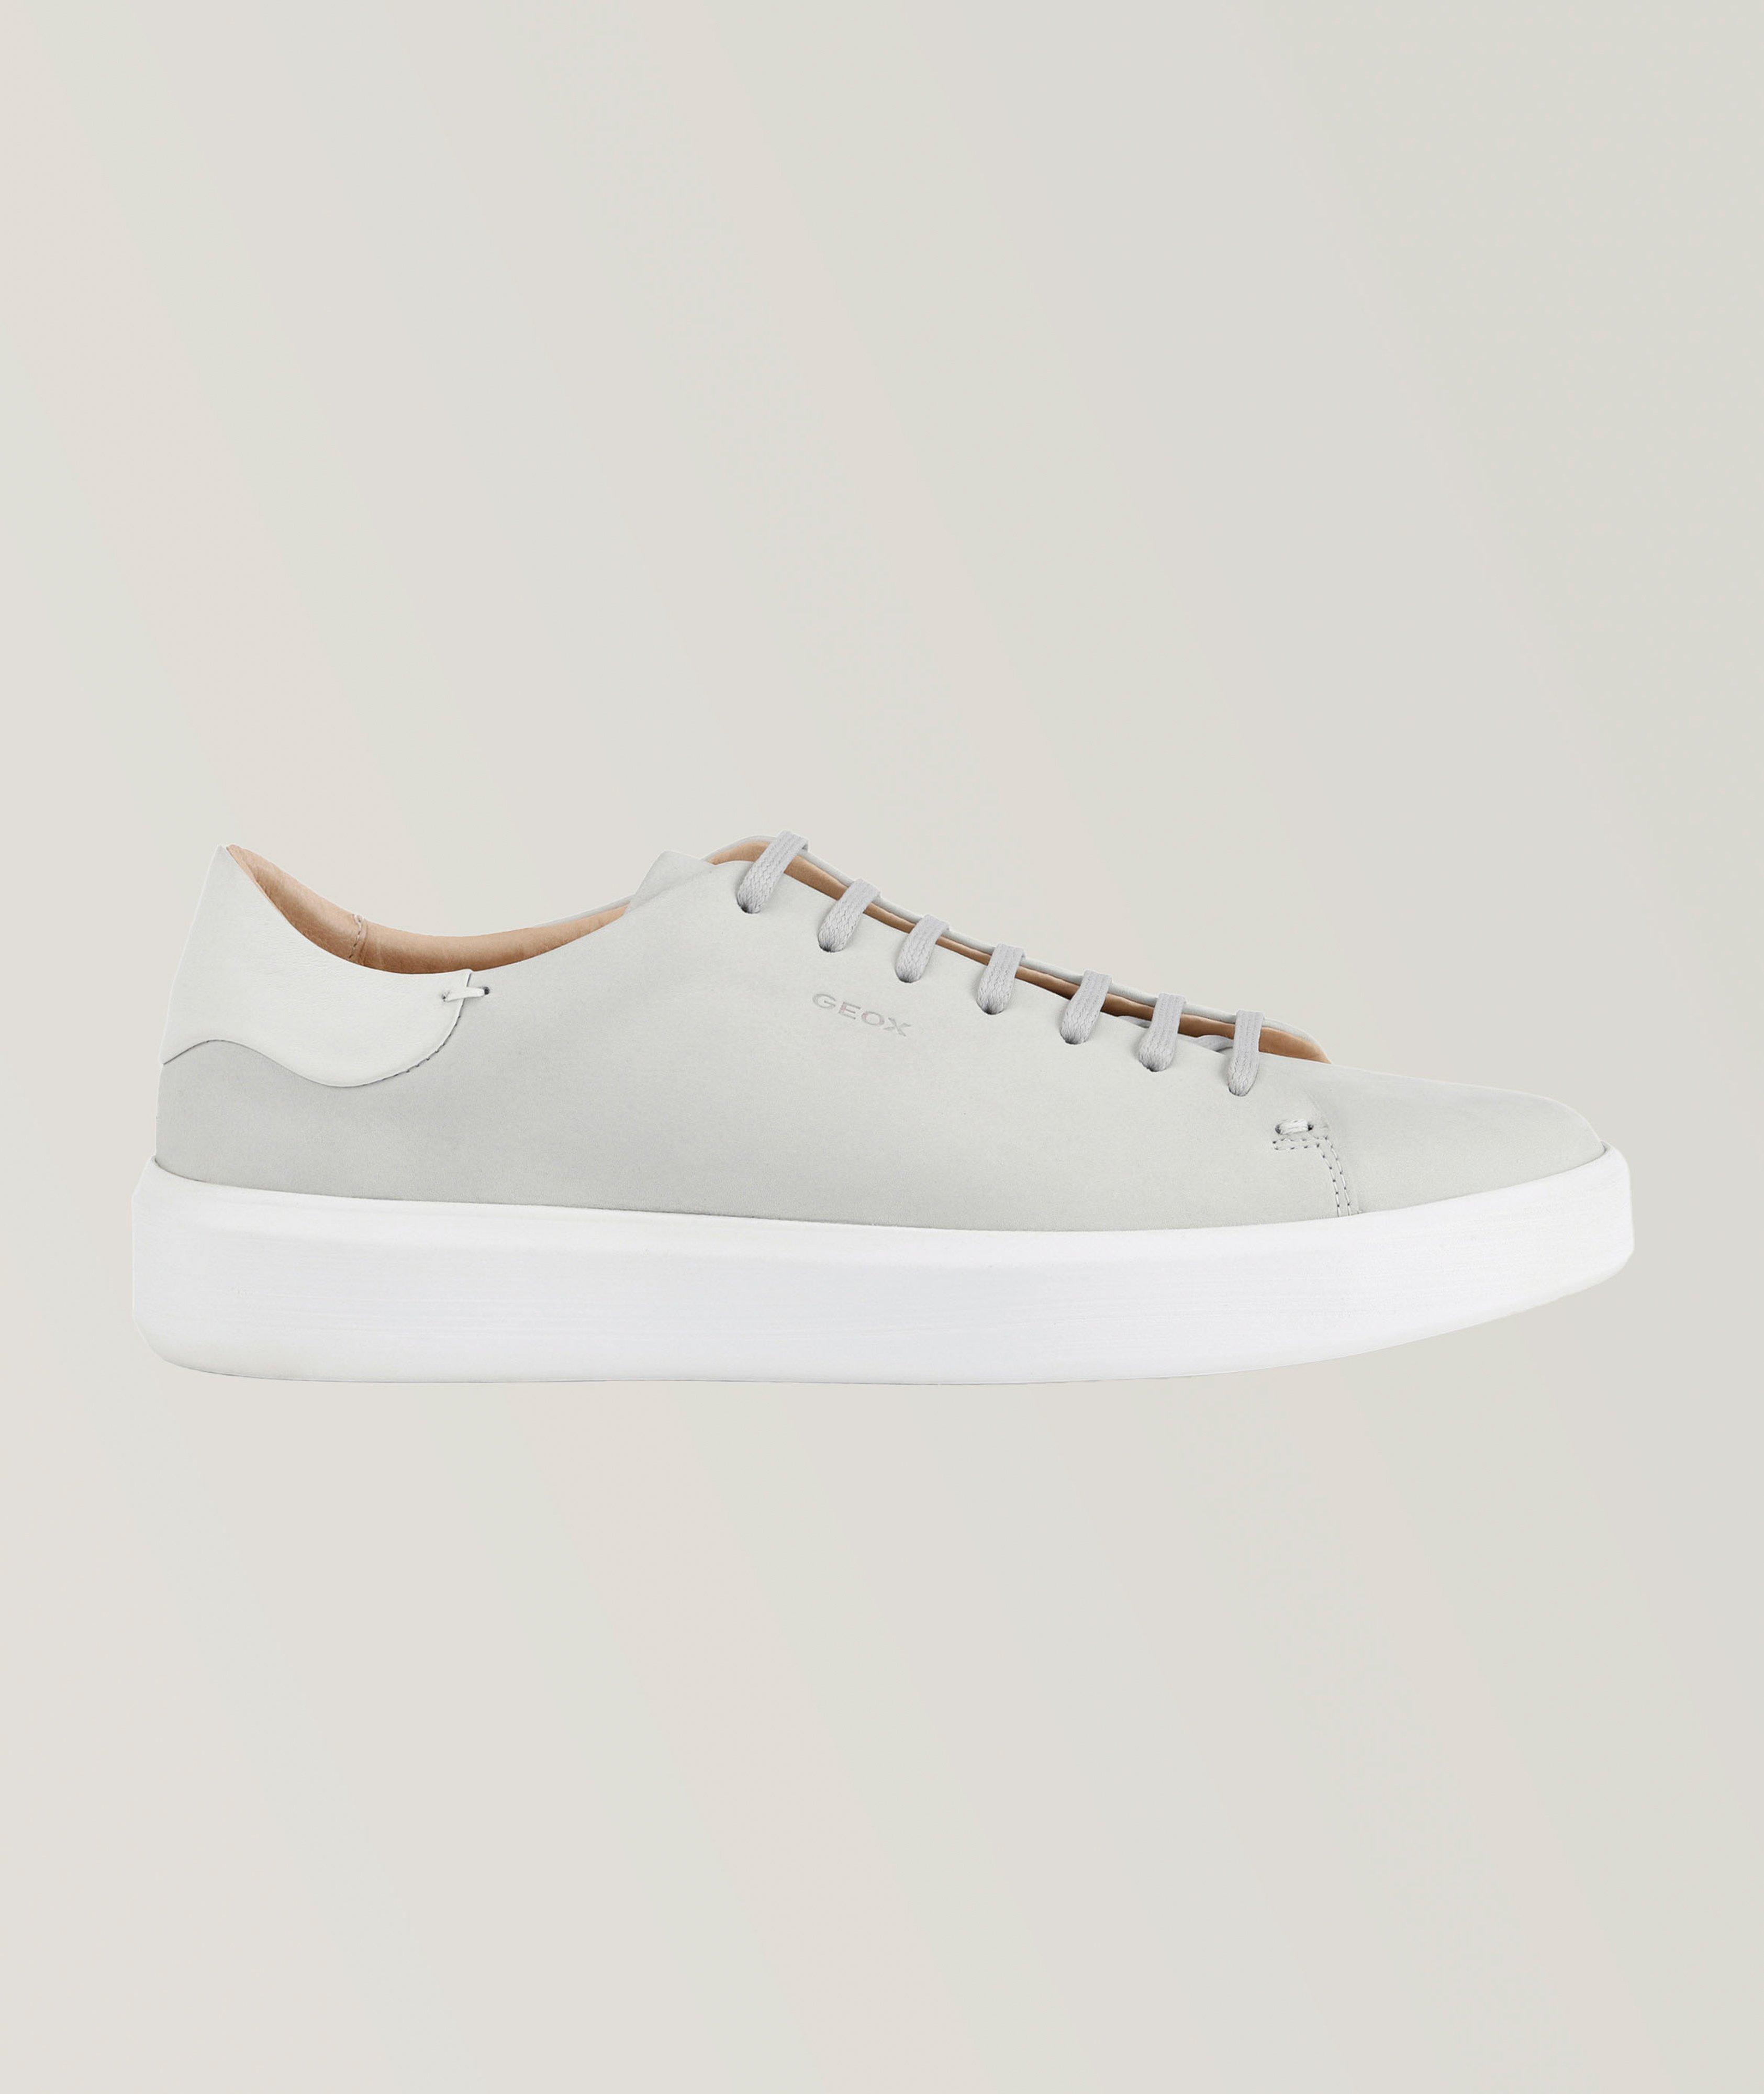 Velletri Mixed Materials Sneakers image 1